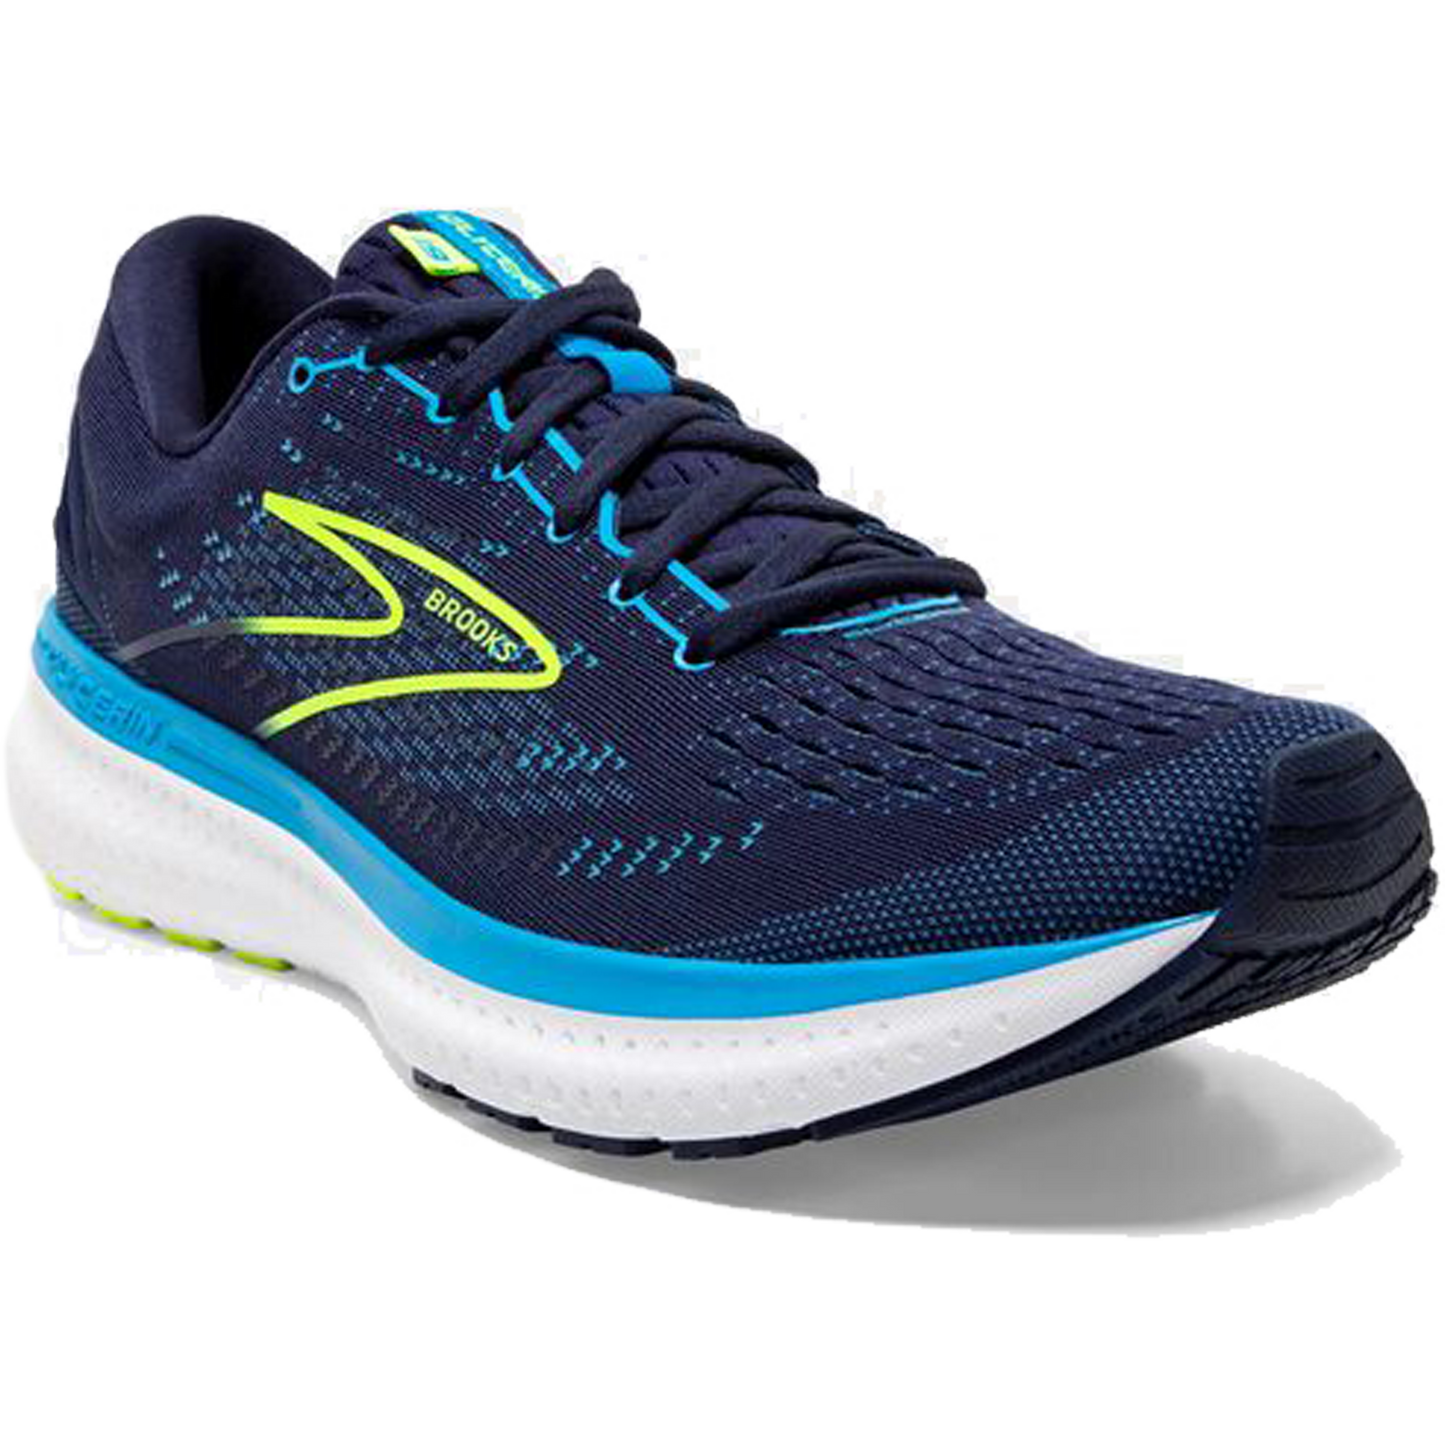 The brooks mens glycerin 19 running shoes in nmavy/blue/nightlife